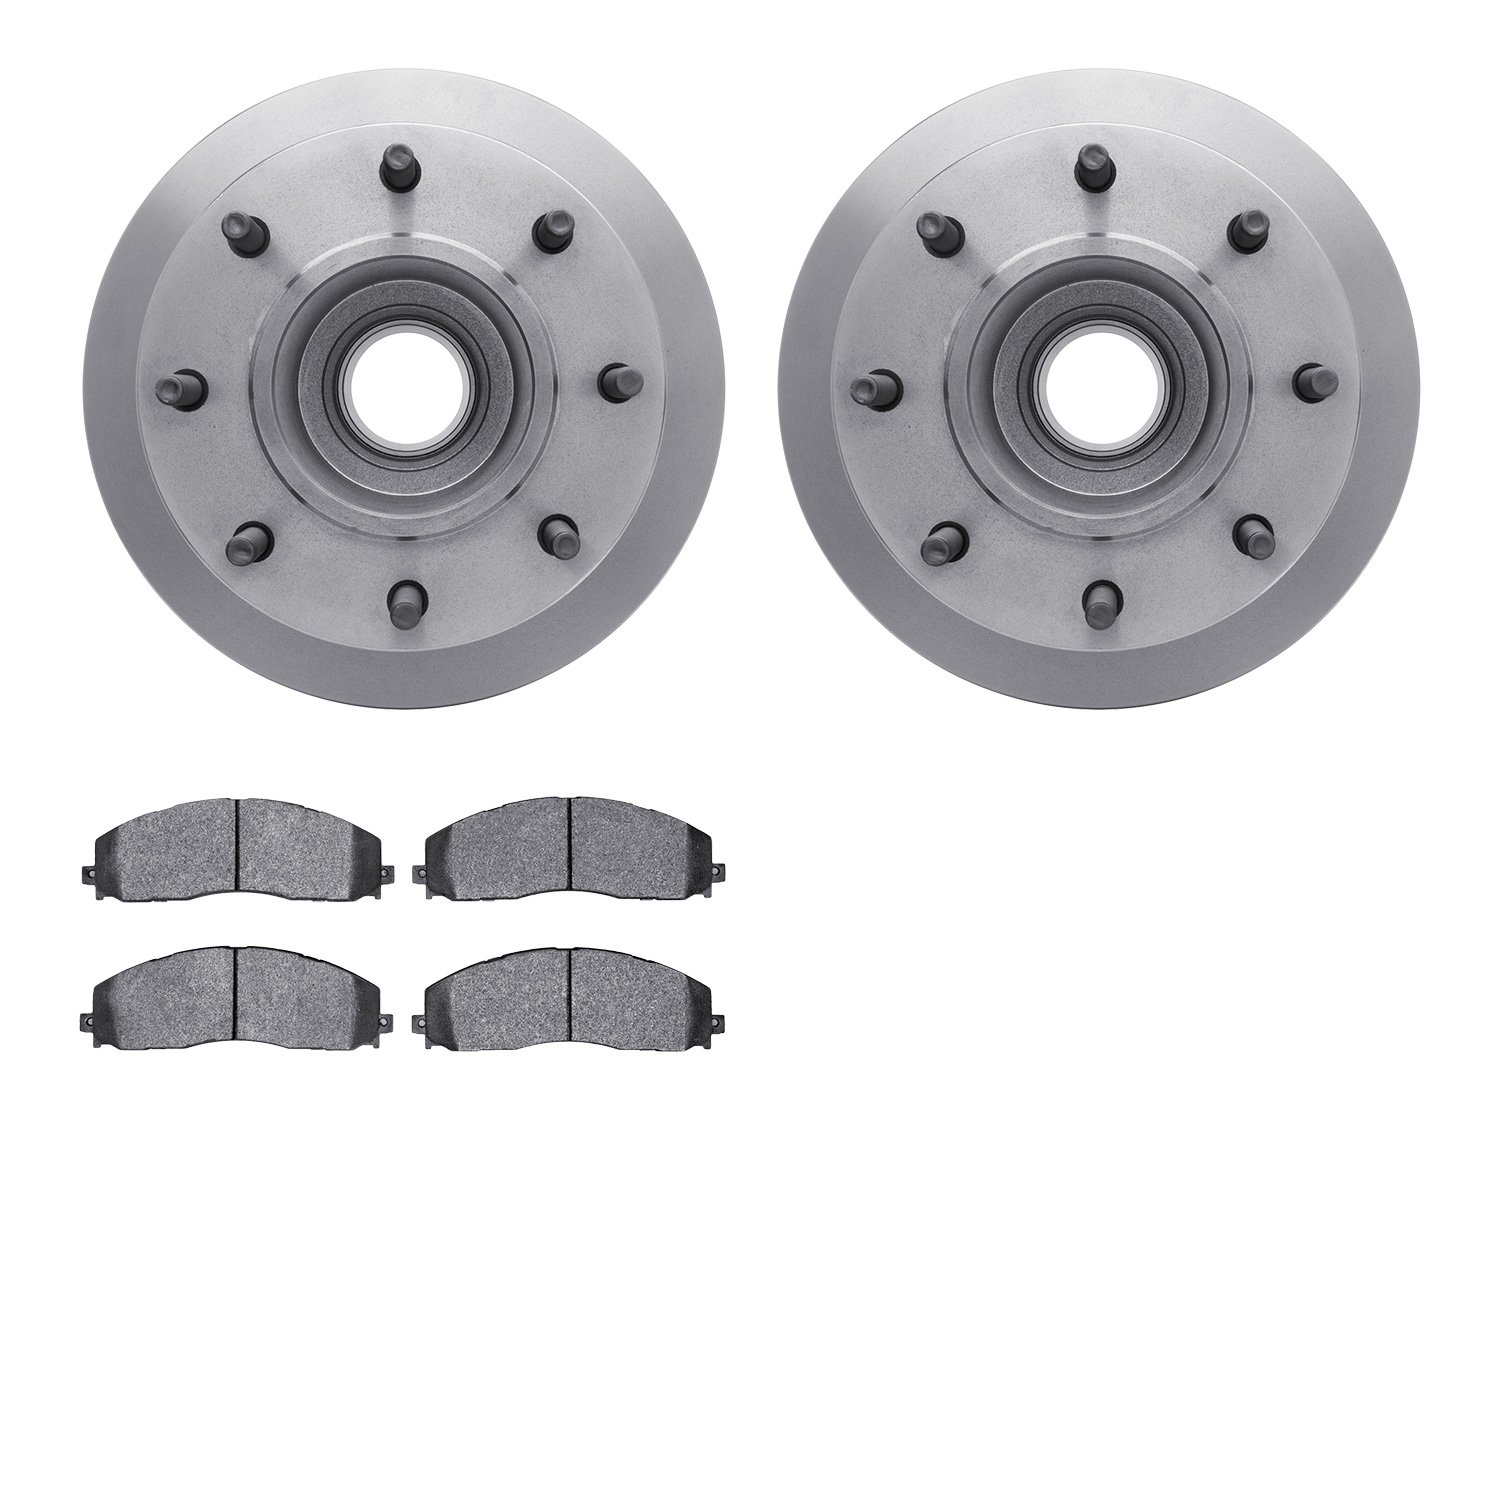 6402-54296 Brake Rotors with Ultimate-Duty Brake Pads, Fits Select Ford/Lincoln/Mercury/Mazda, Position: Front